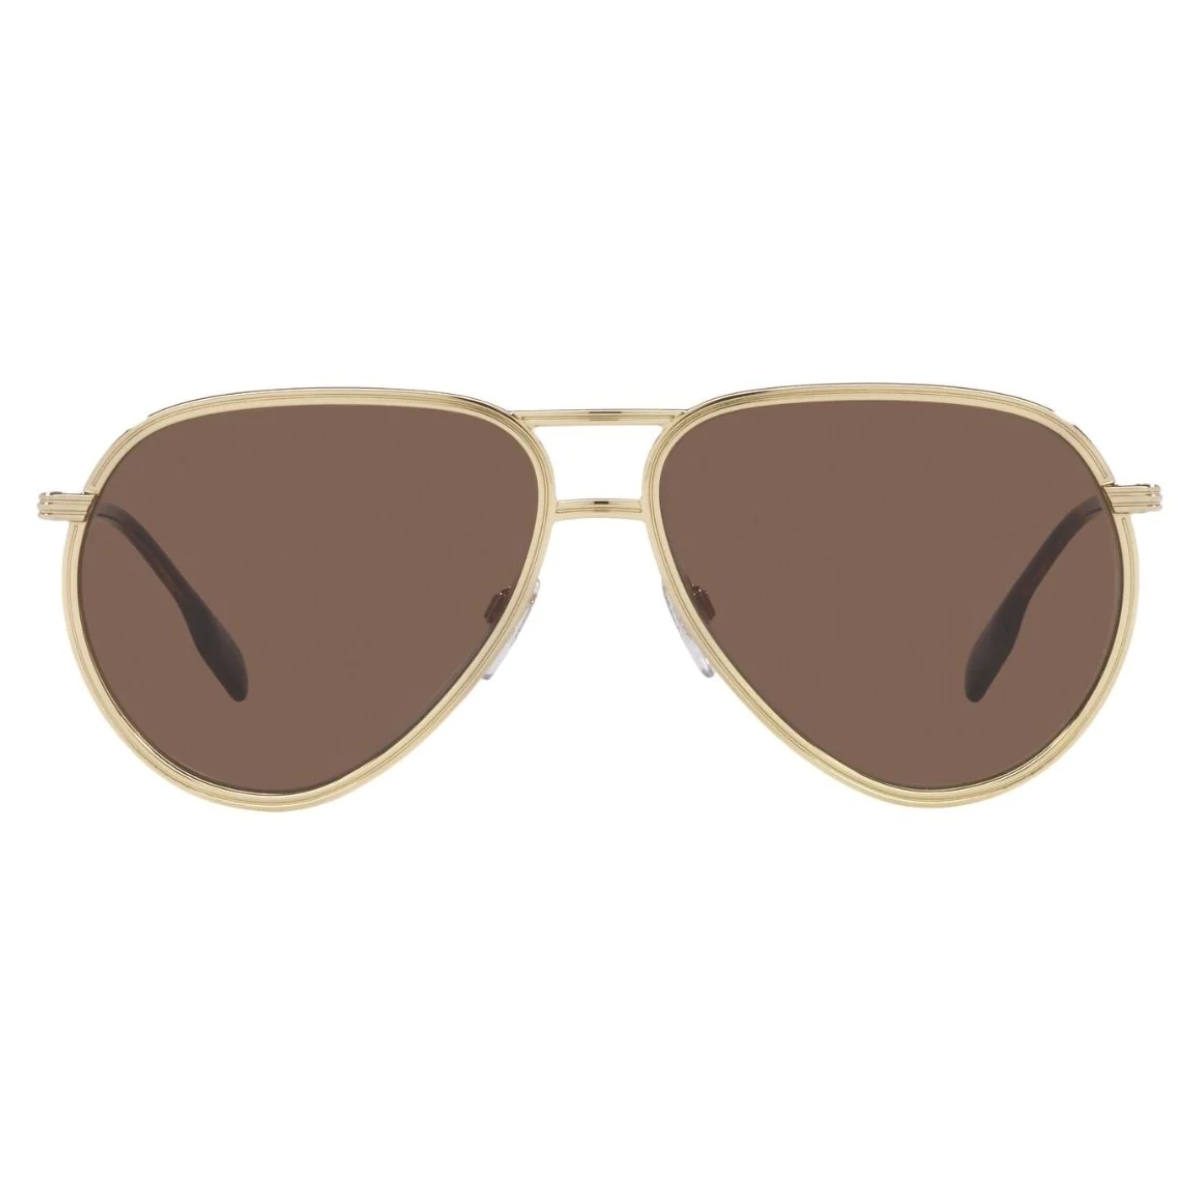 "Find your perfect pair of Burberry 3135 1109/73 59 Sunglass for men at Optorium: Browse our collection for the best men's sunglasses and cooling glasses."